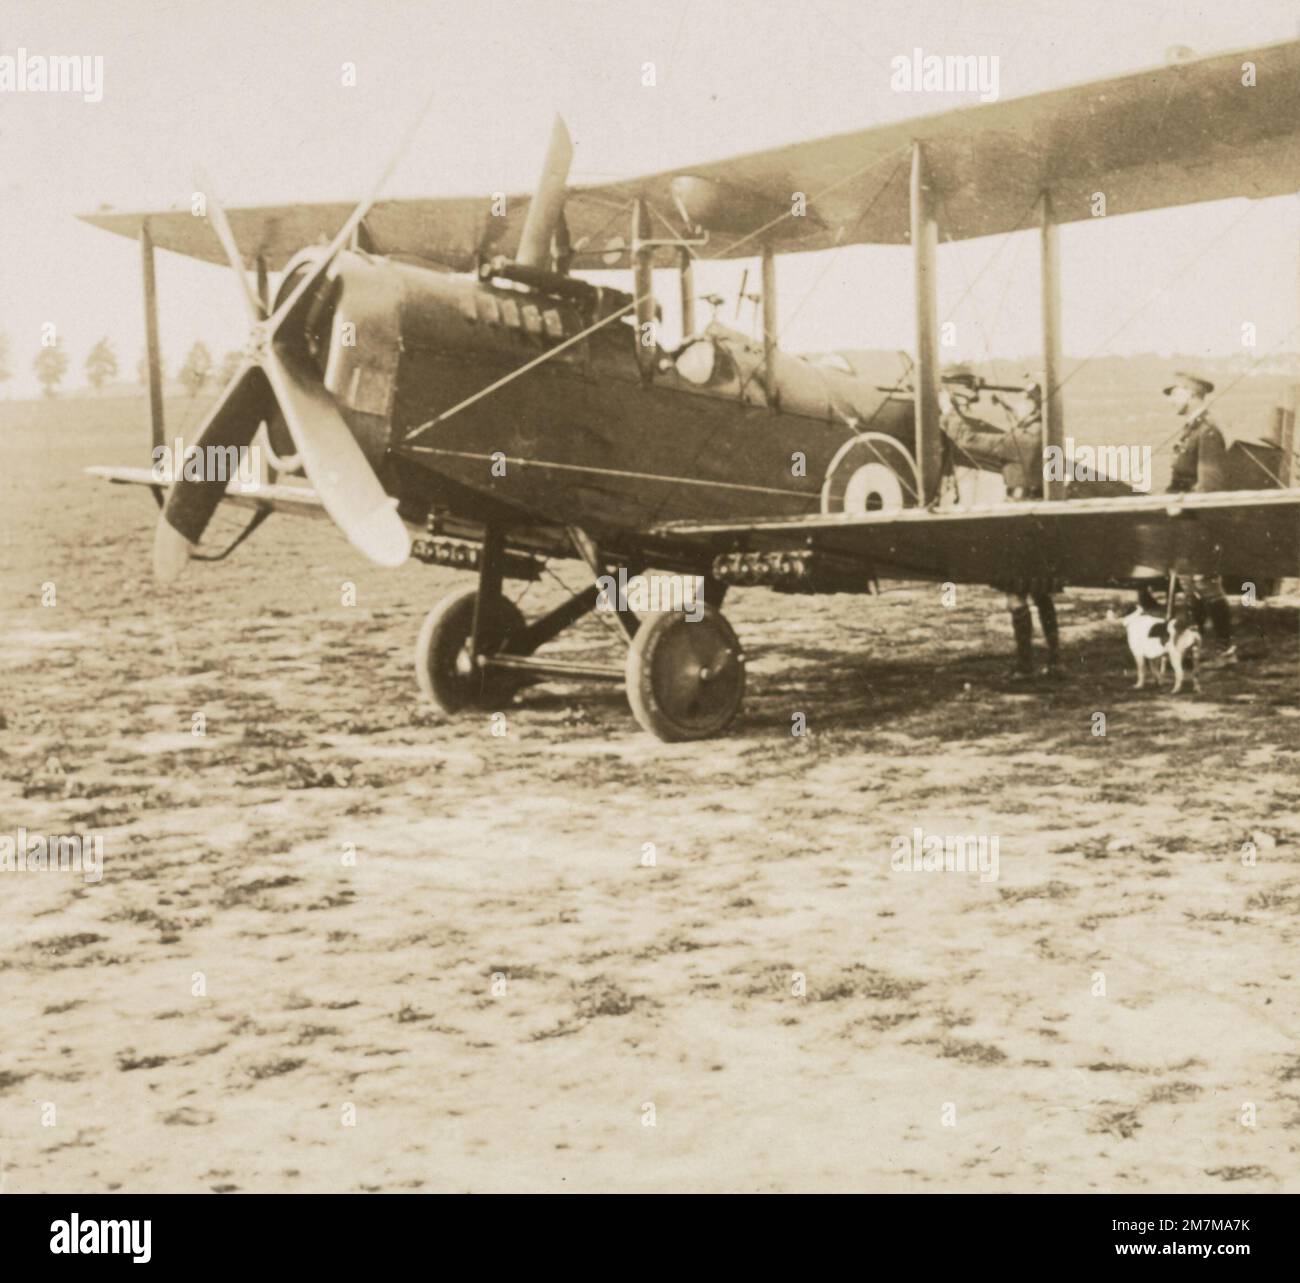 Vintage photo circa 1918 of a British Airco DeHavilland DH4 two seat bomber aircraft used by the Royal Flying Corps during World War One. It entered service in January 1917 Stock Photo